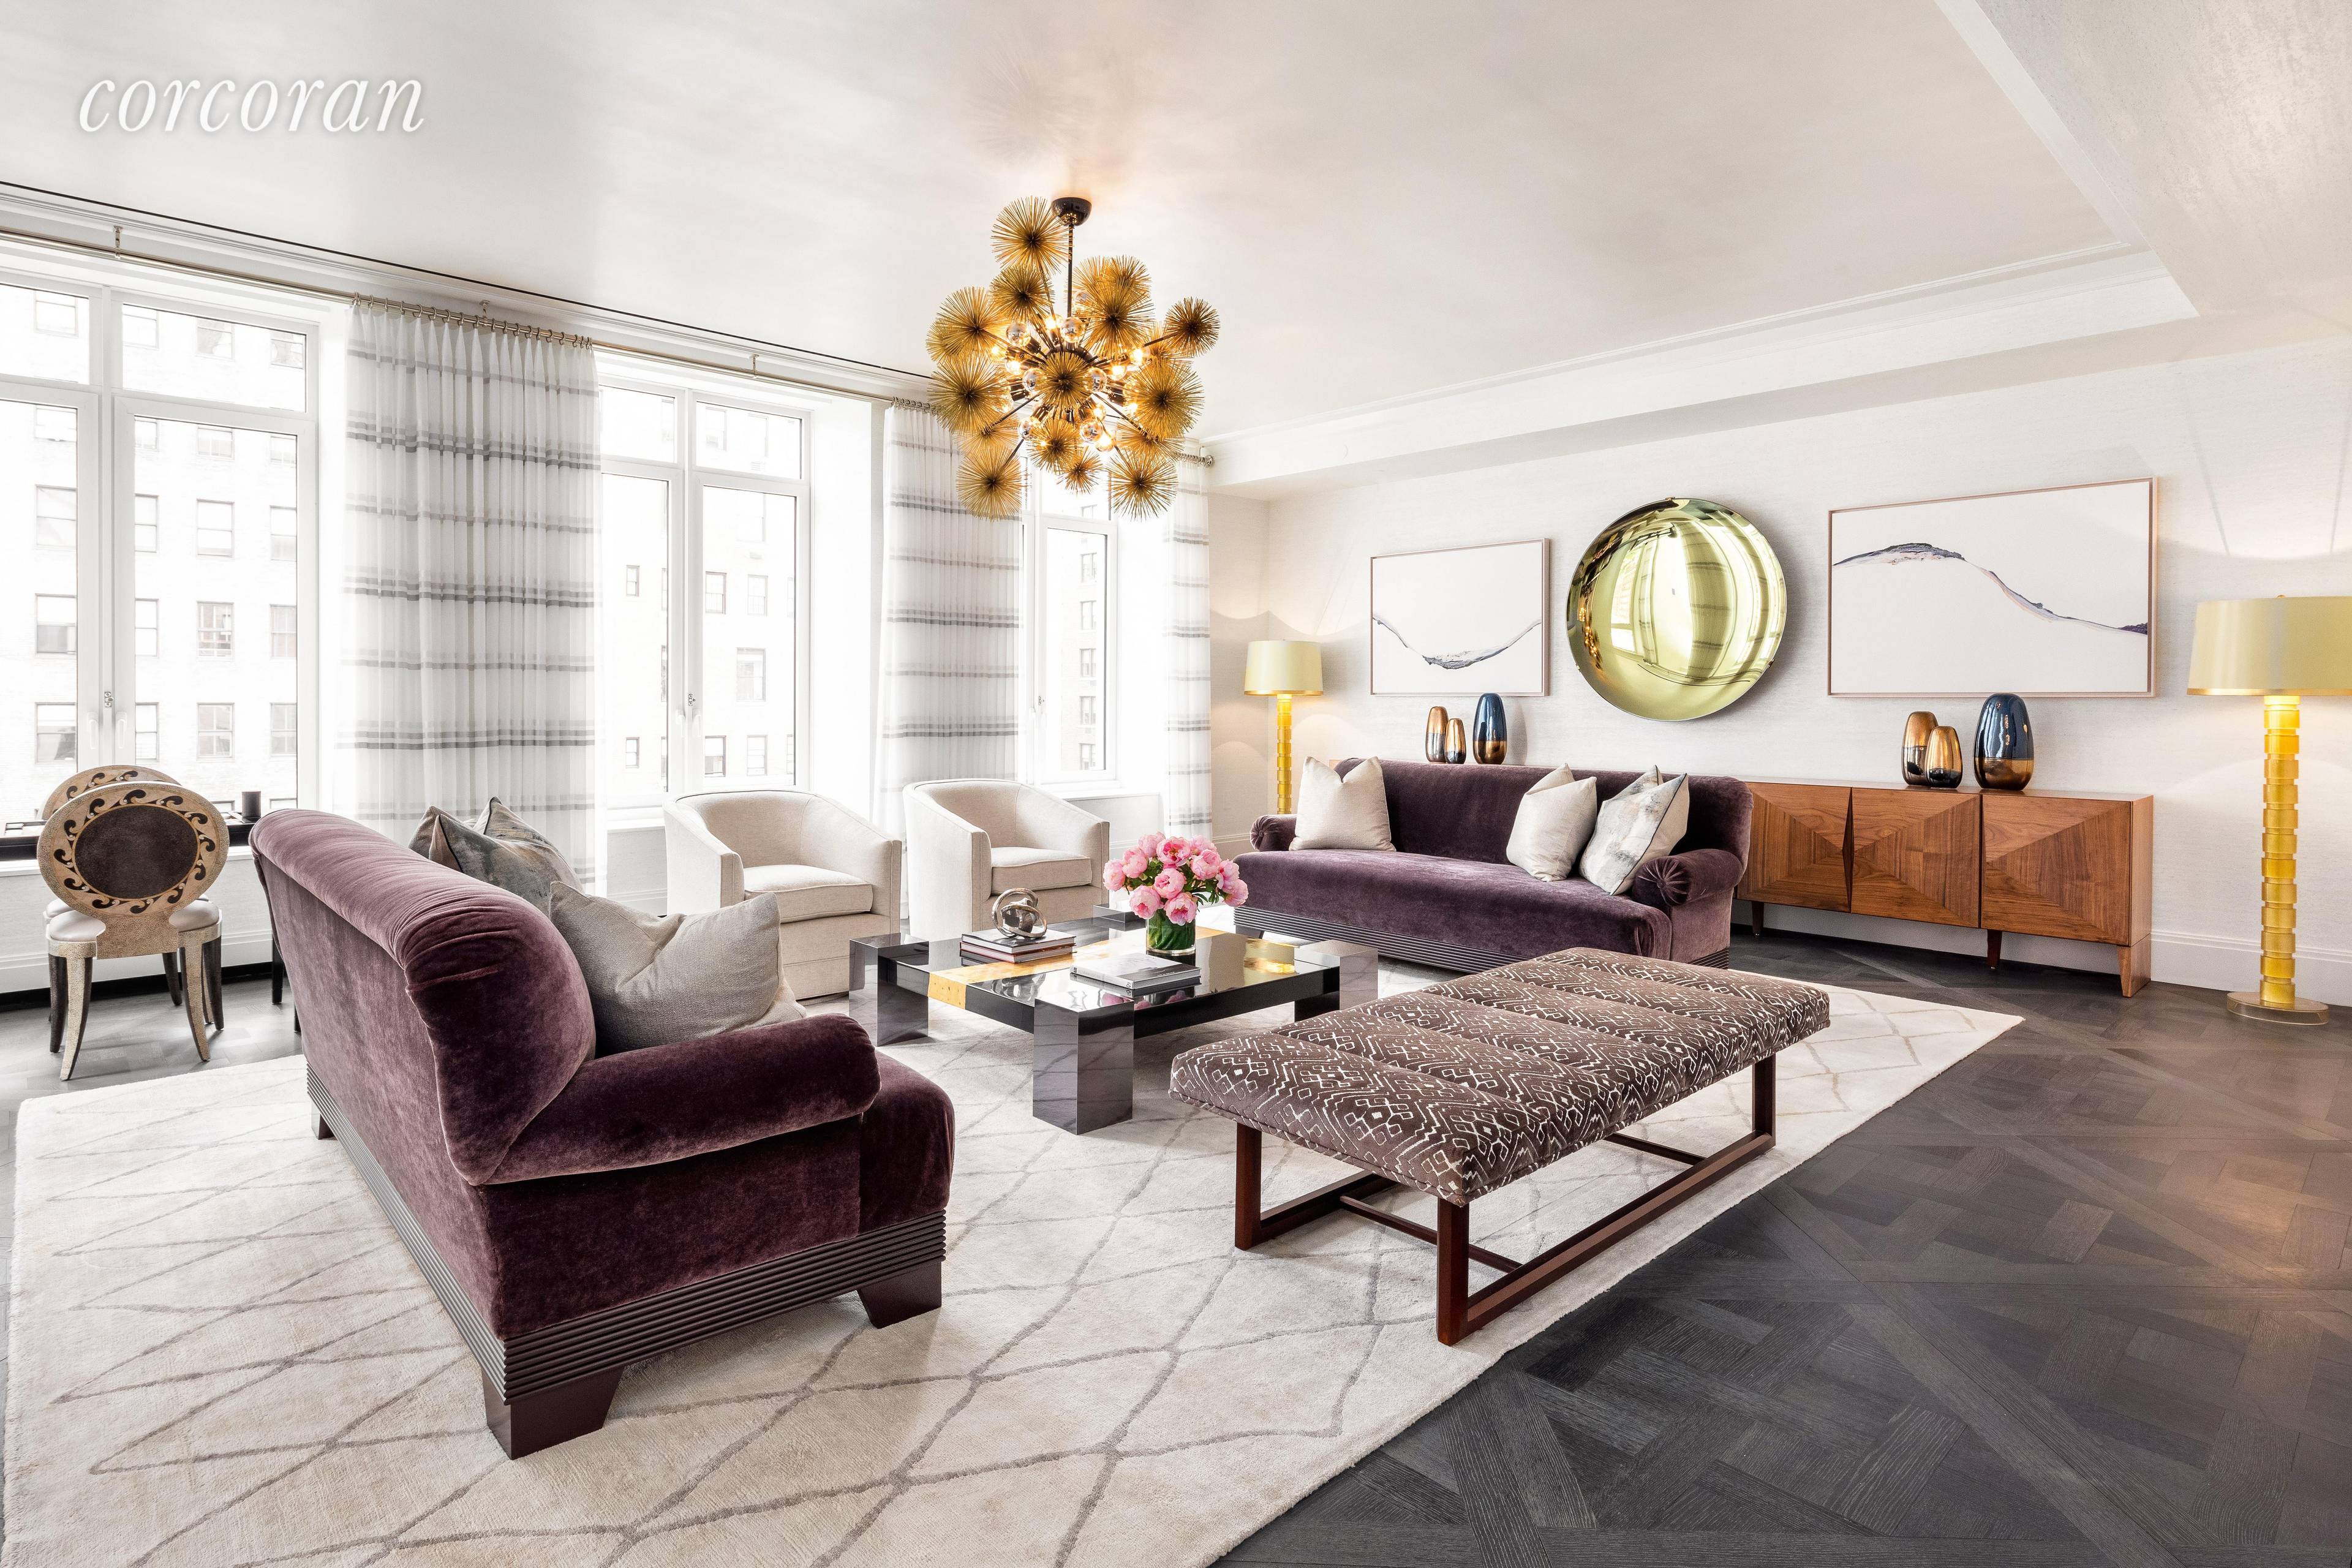 Introducing the 5th floor at 1010 Park Avenue, one of New Yorks most distinguished new addresses and finest boutique condominiums developed by The Extell Development Company.